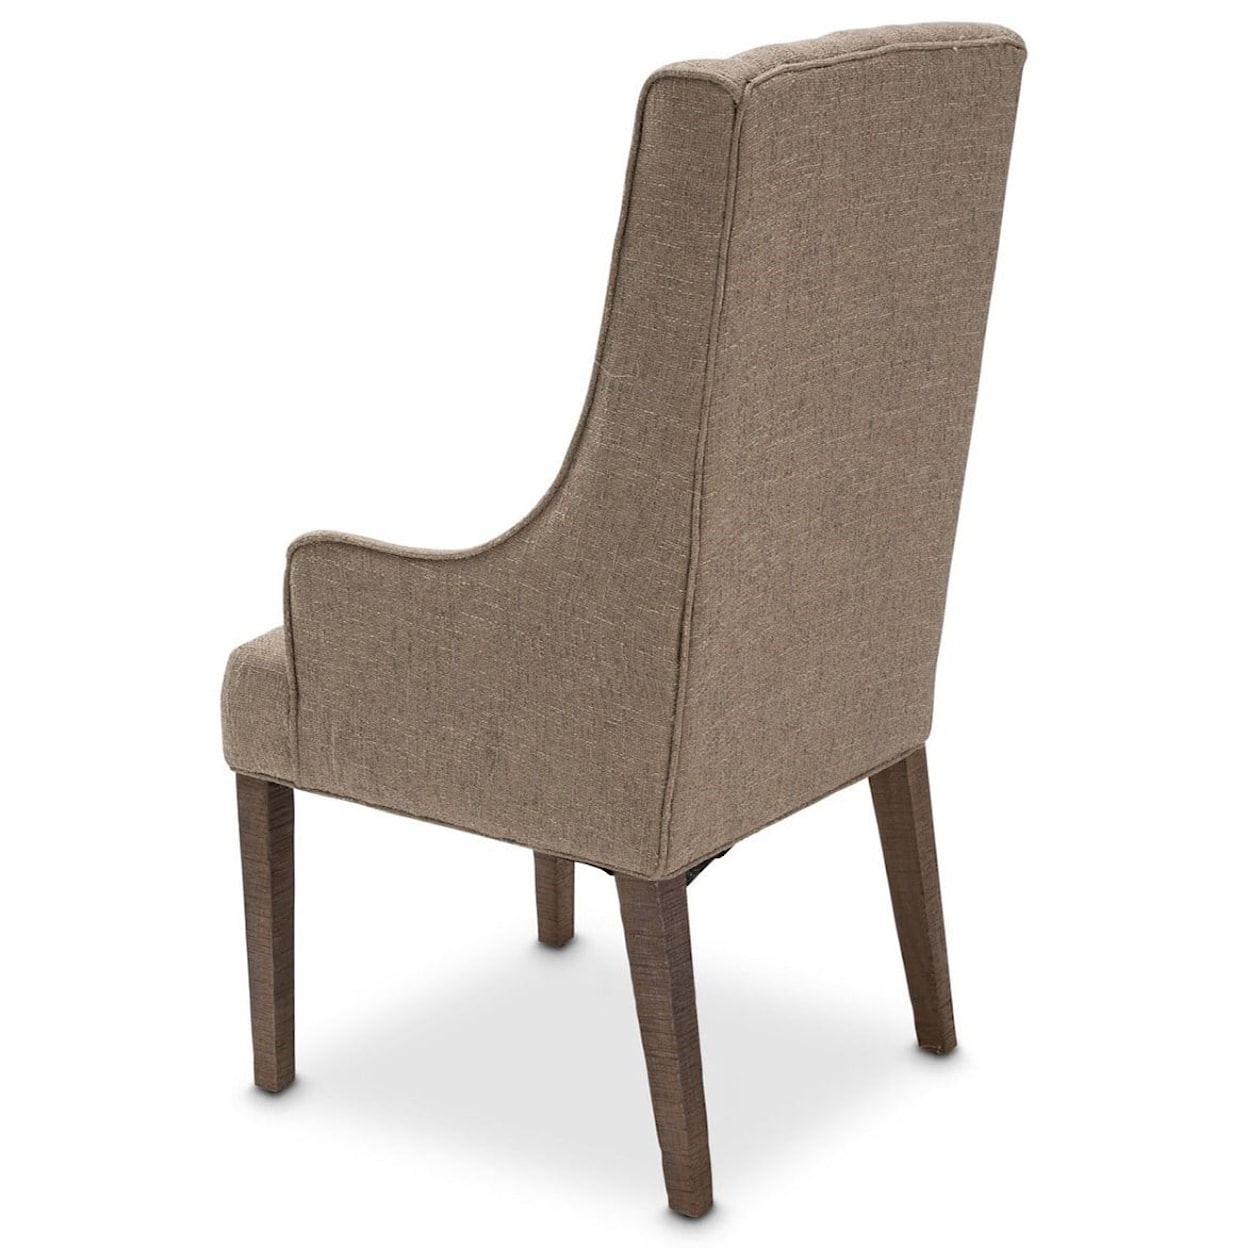 Michael Amini Hudson Ferry Upholstered Arm Chair